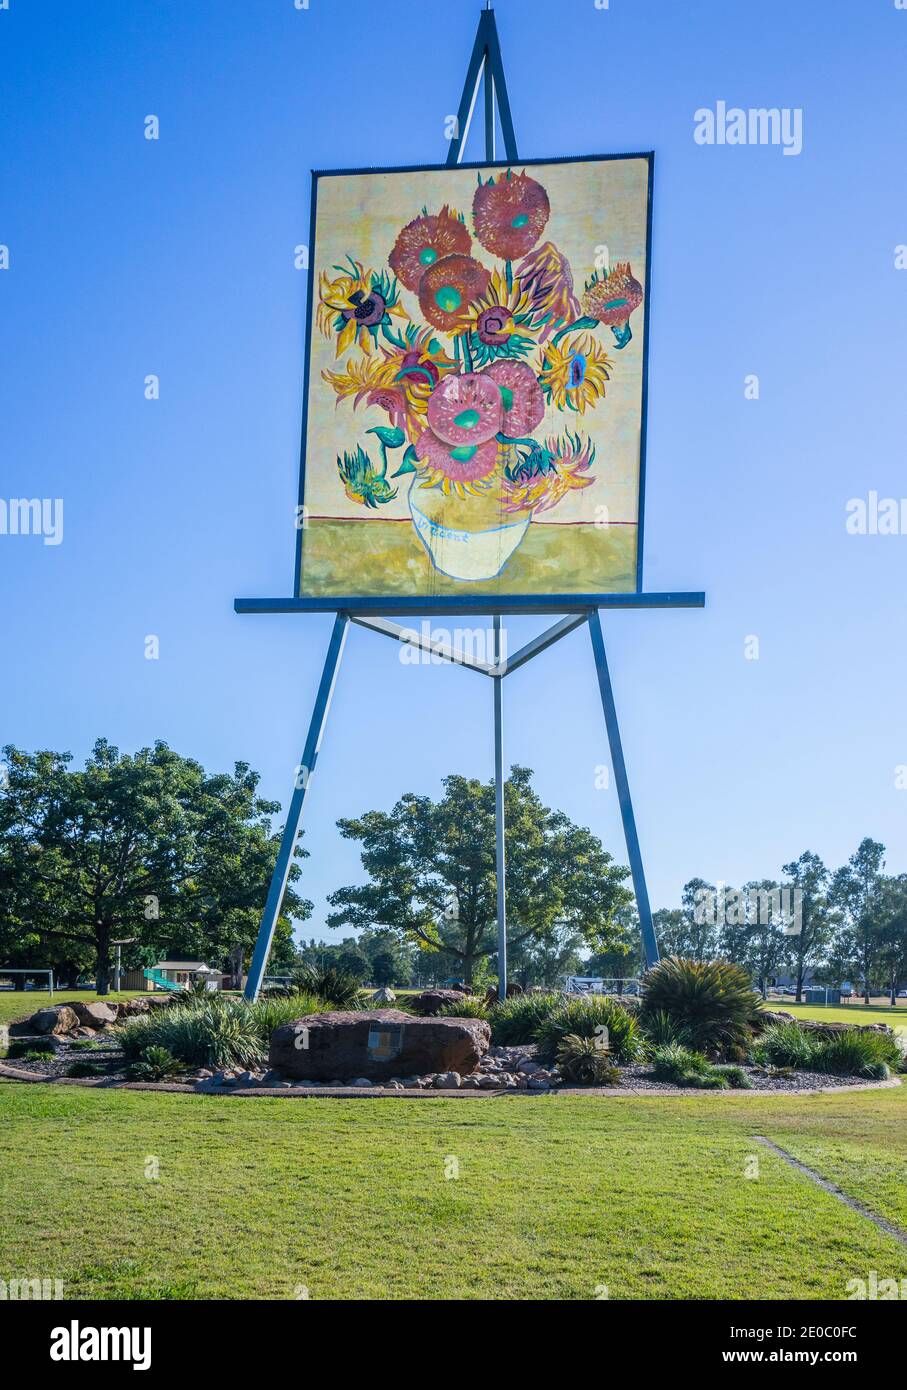 The Emerald Giant Van Gogh Sunflower Painting at Morton Park, Emerald, also known as 'The Big Easel', Central Highlands Region, Queensland, Australia Stock Photo